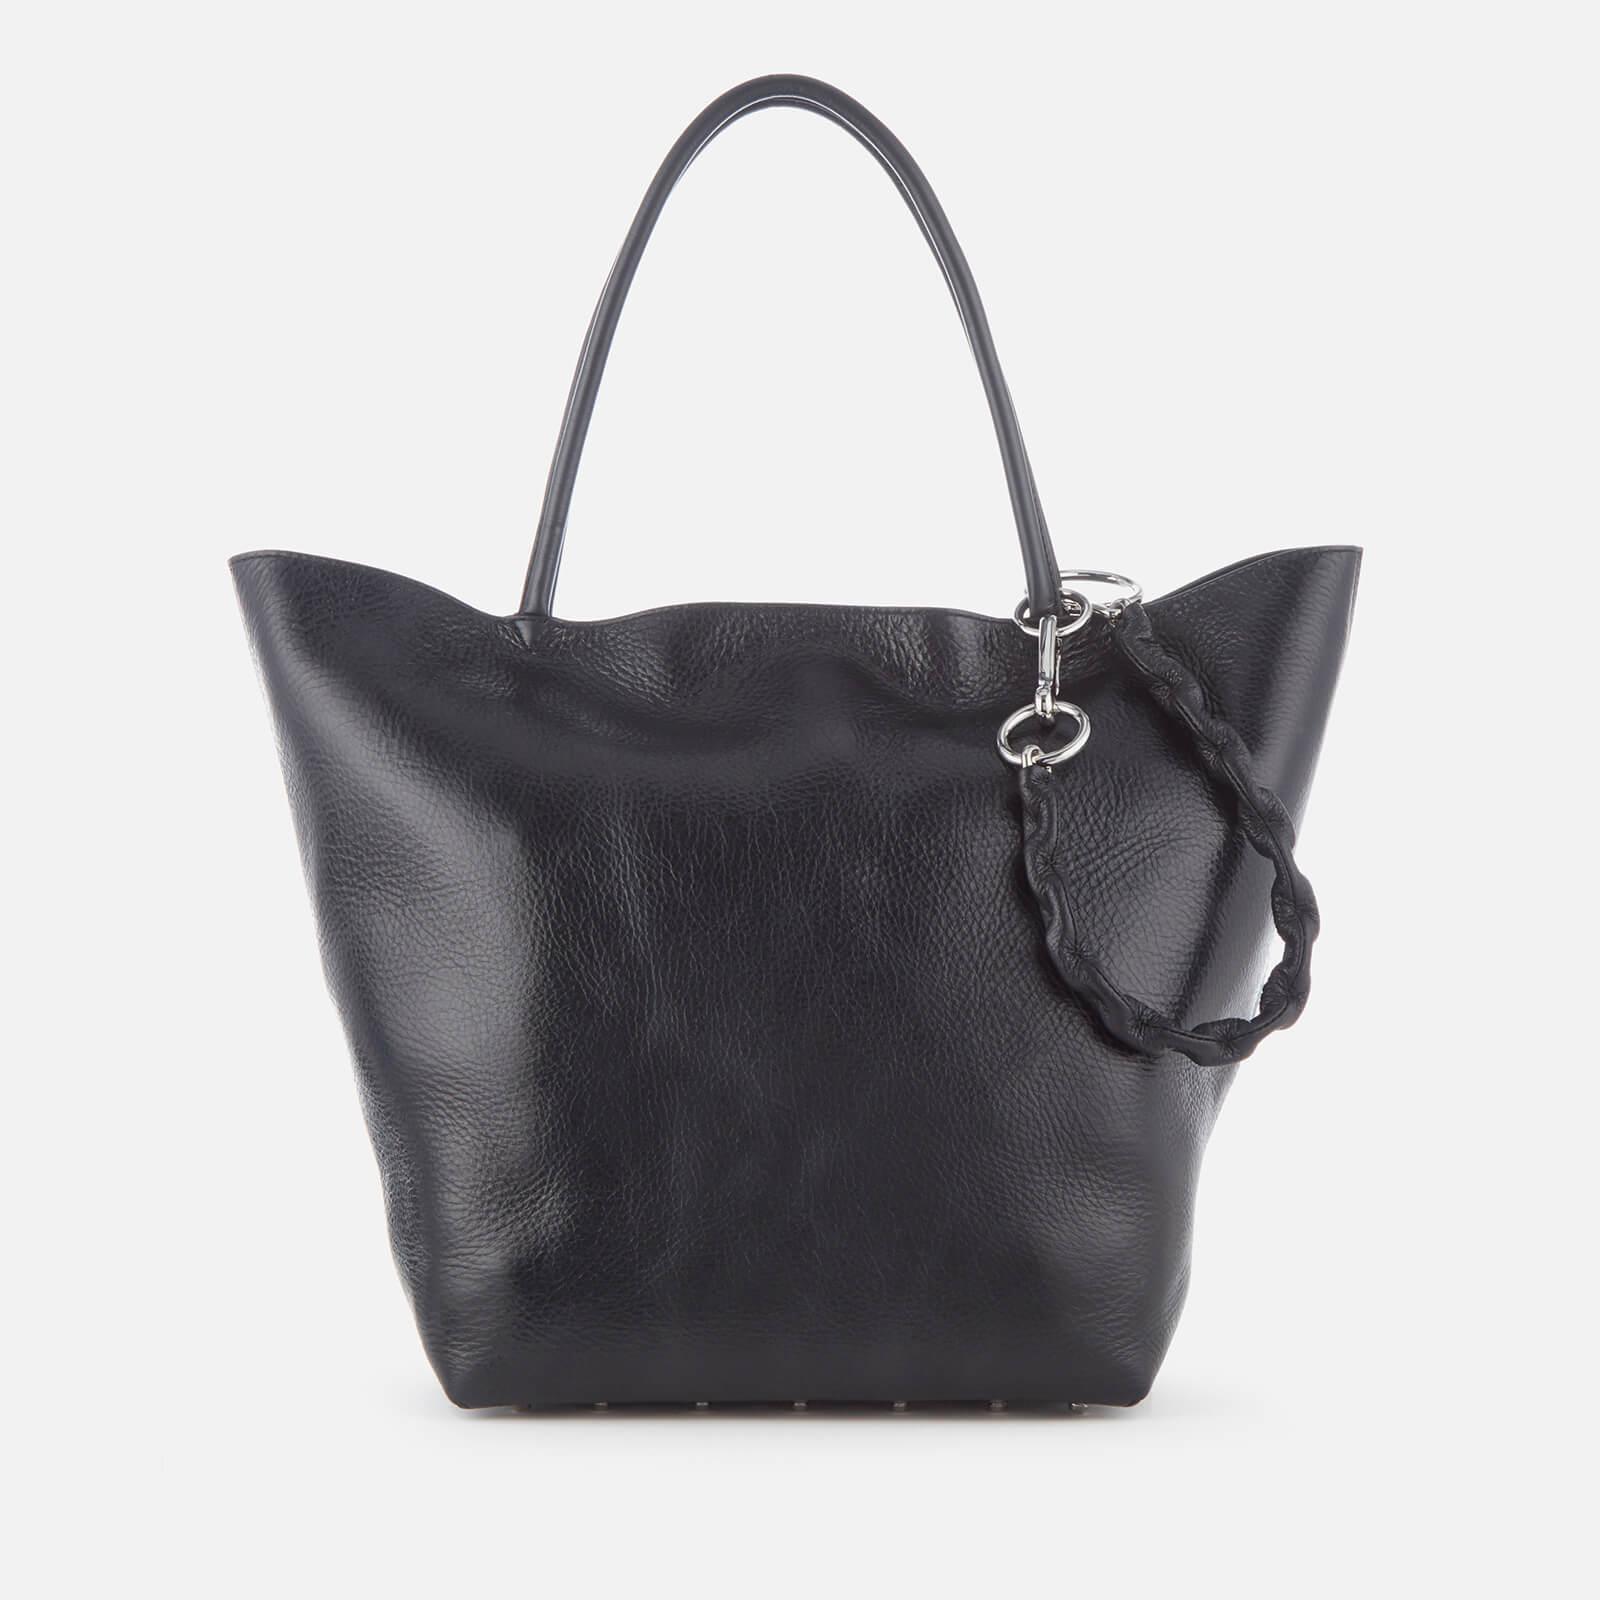 Alexander Wang Leather Roxy Soft Large Tote Bag in Black - Lyst